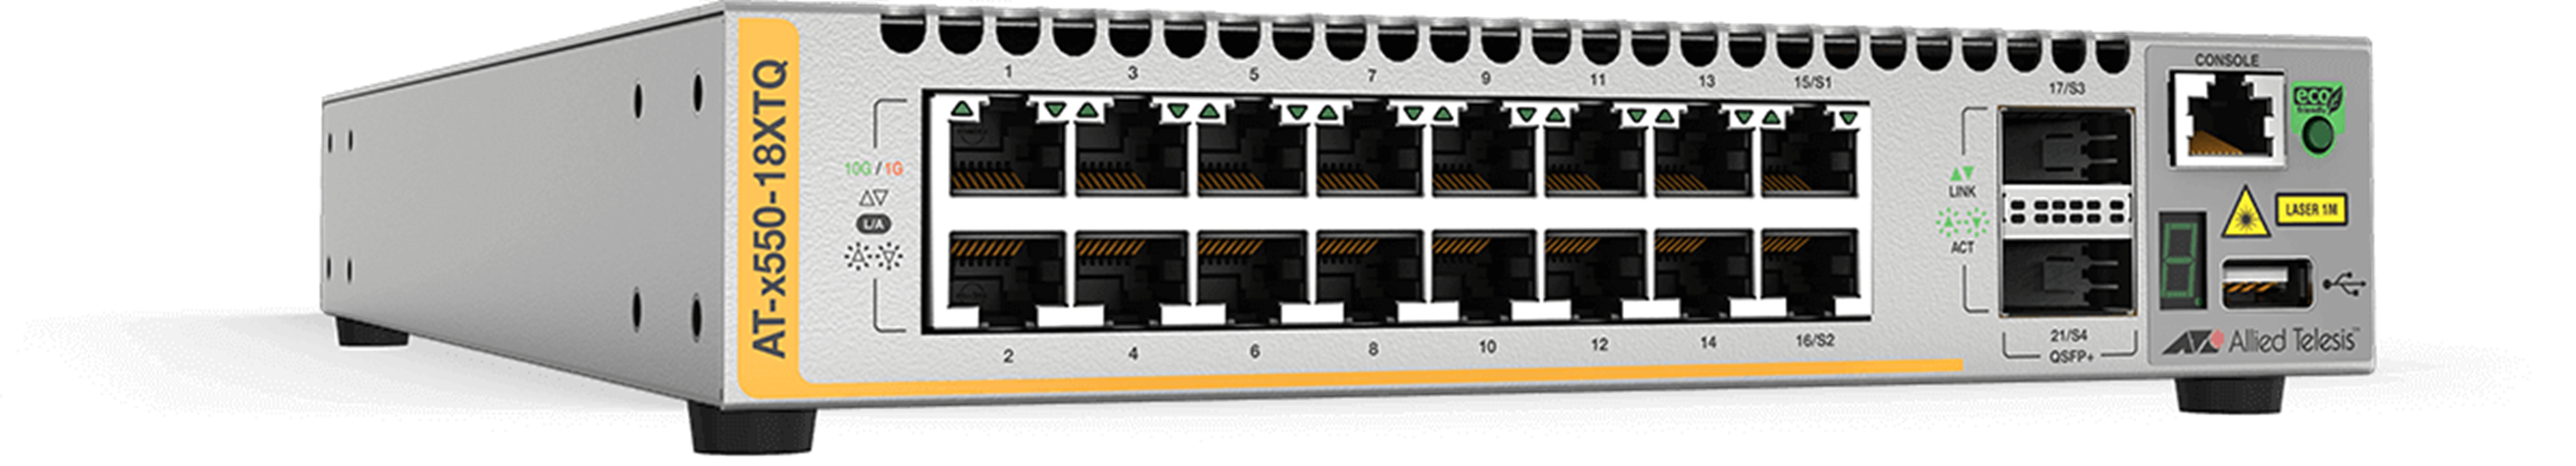 AT-x550 series - Advanced 1/10Gigabit Layer 3 Stackable Switches